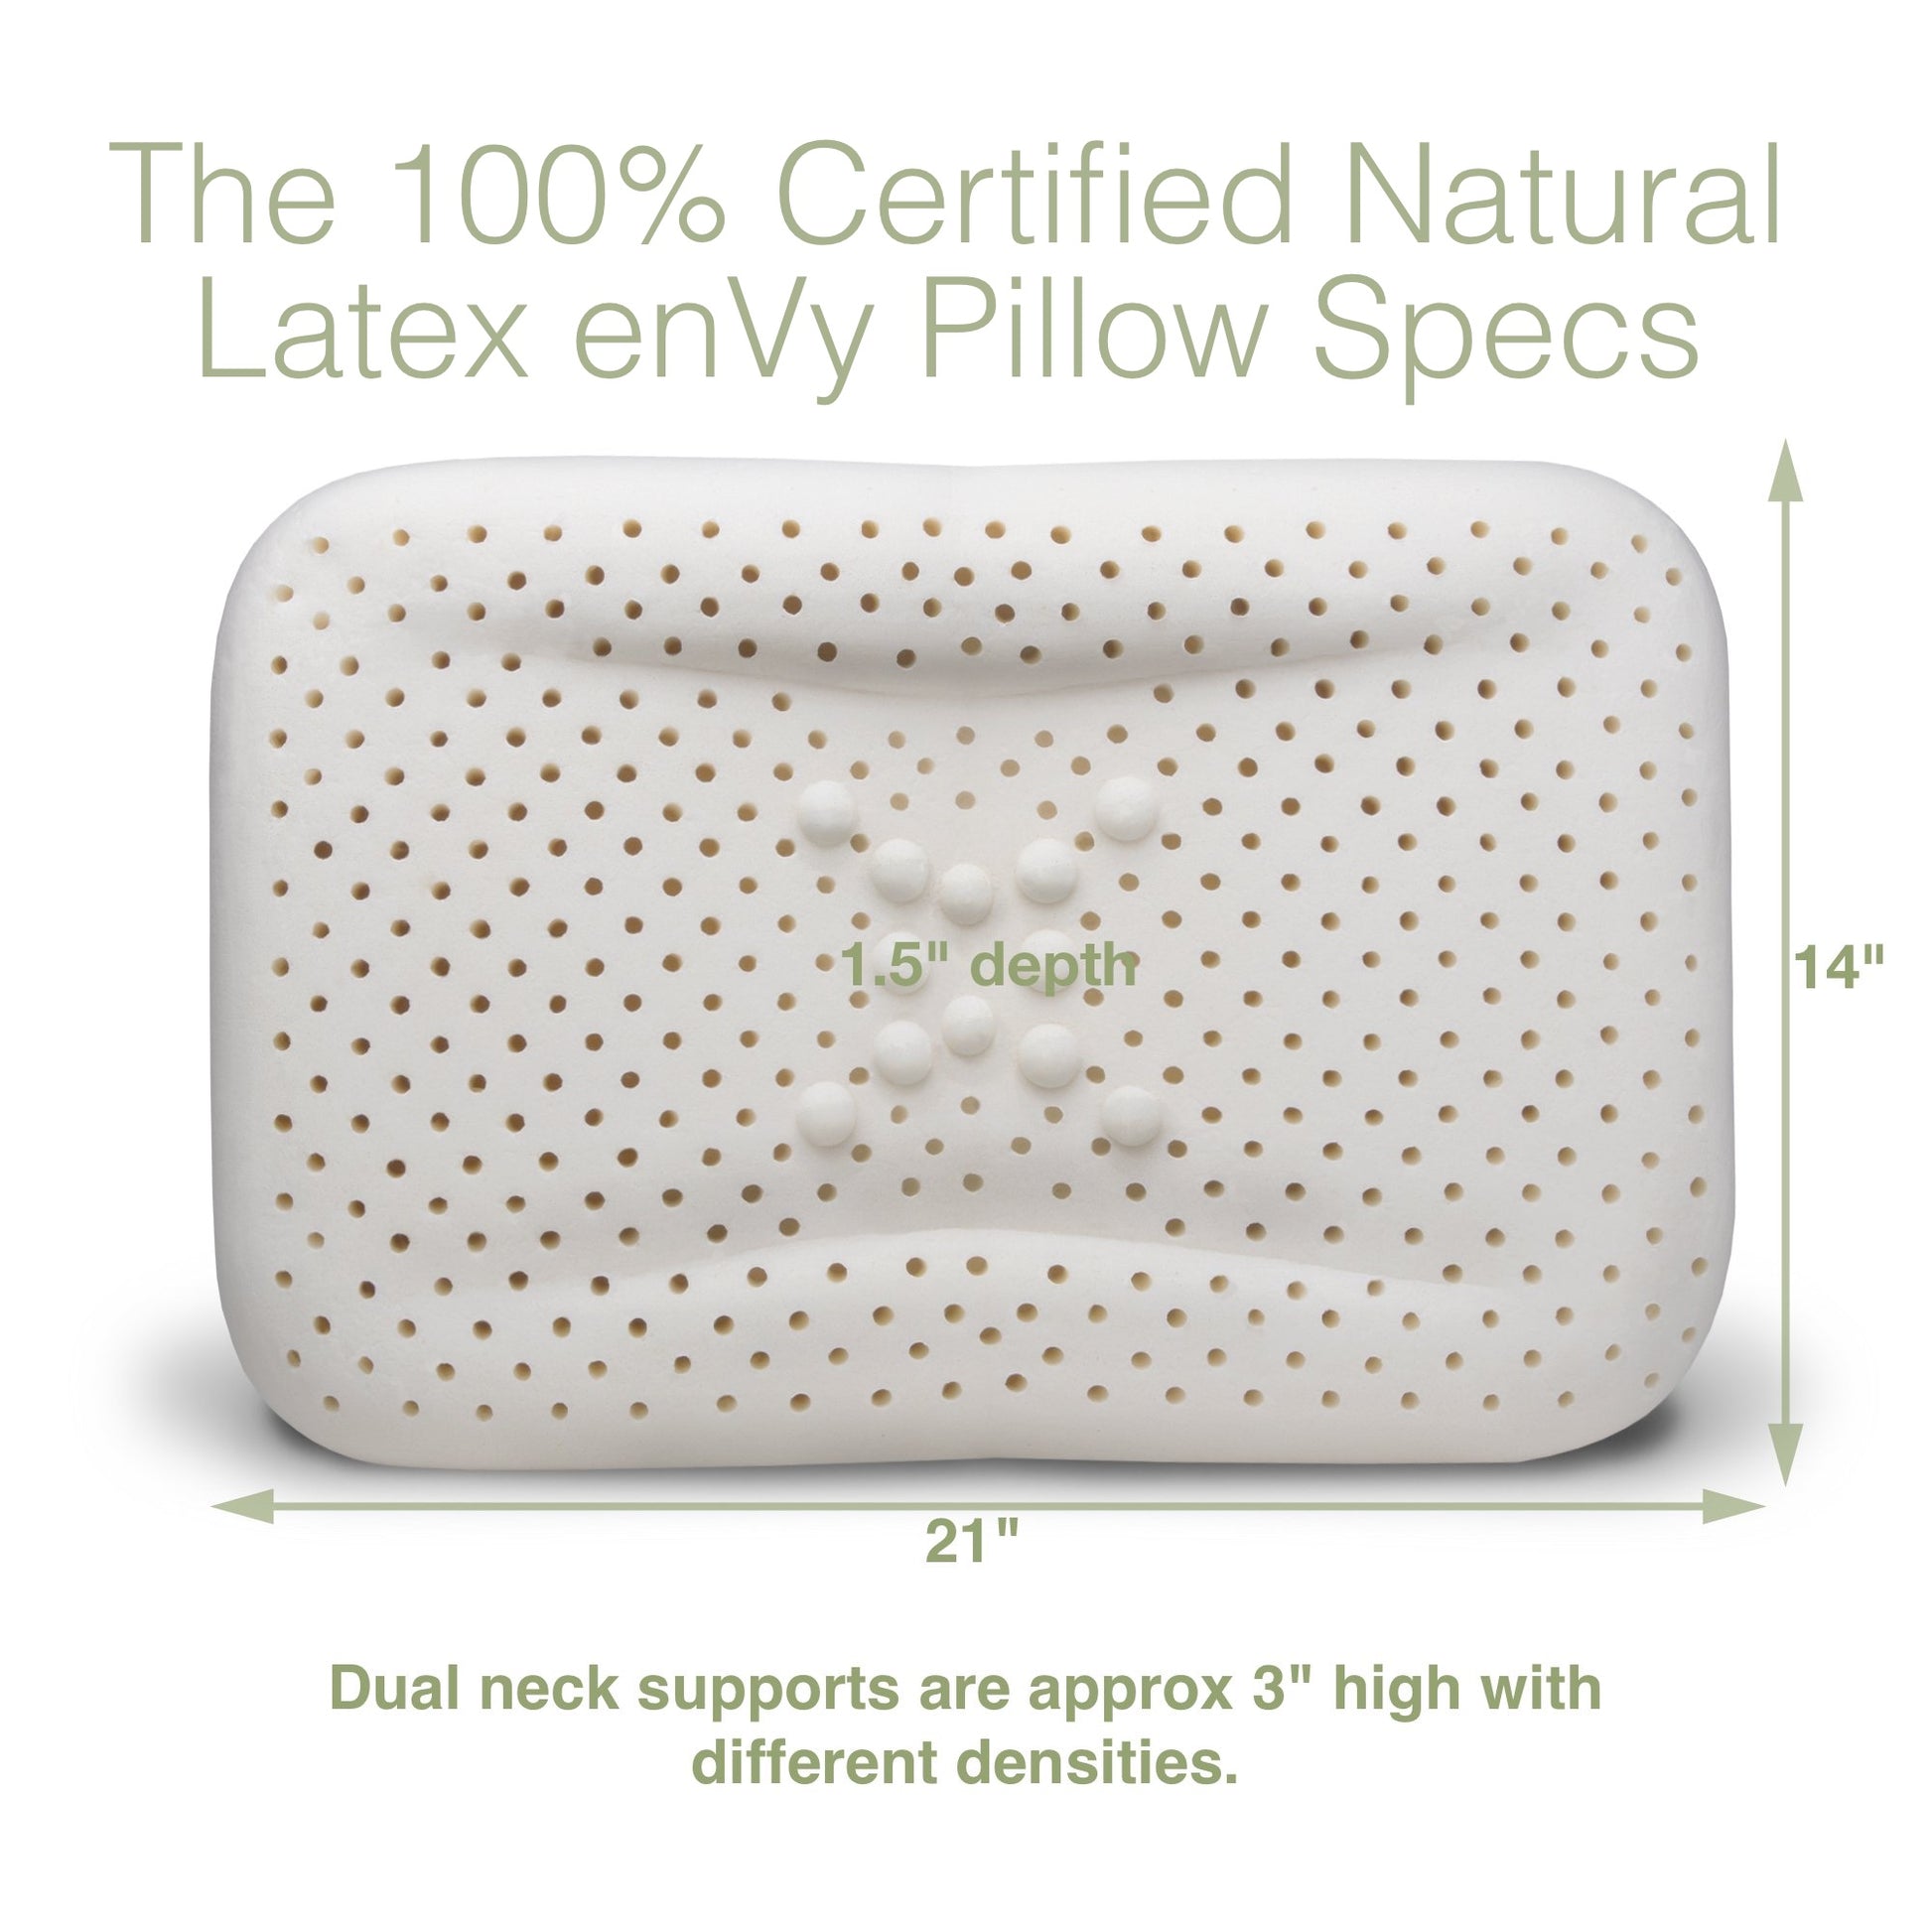 The Best Anti-Wrinkle Pillow - Mulberry Silk and Copper Infused